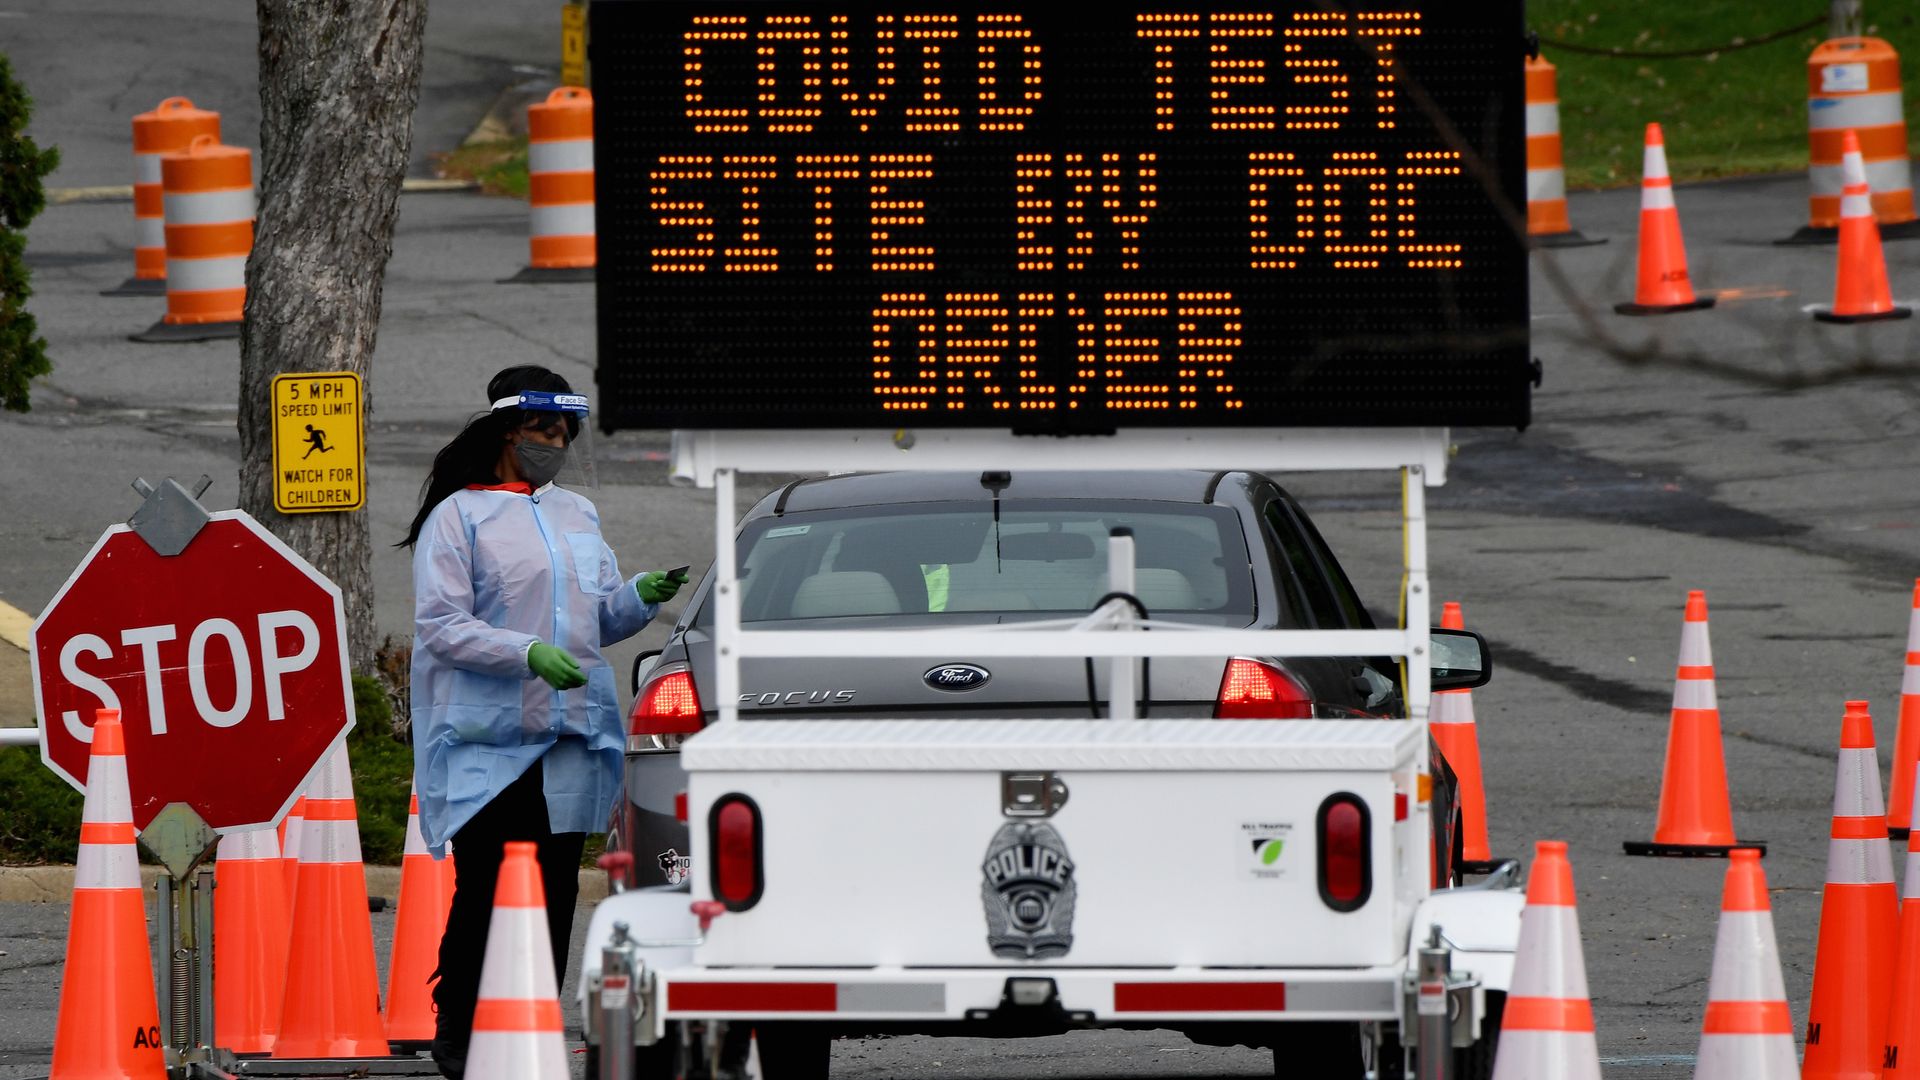 A healthcare worker oversees cars as people arrive to get tested for coronavirus at a testing site in Arlington, Virginia, on December 1